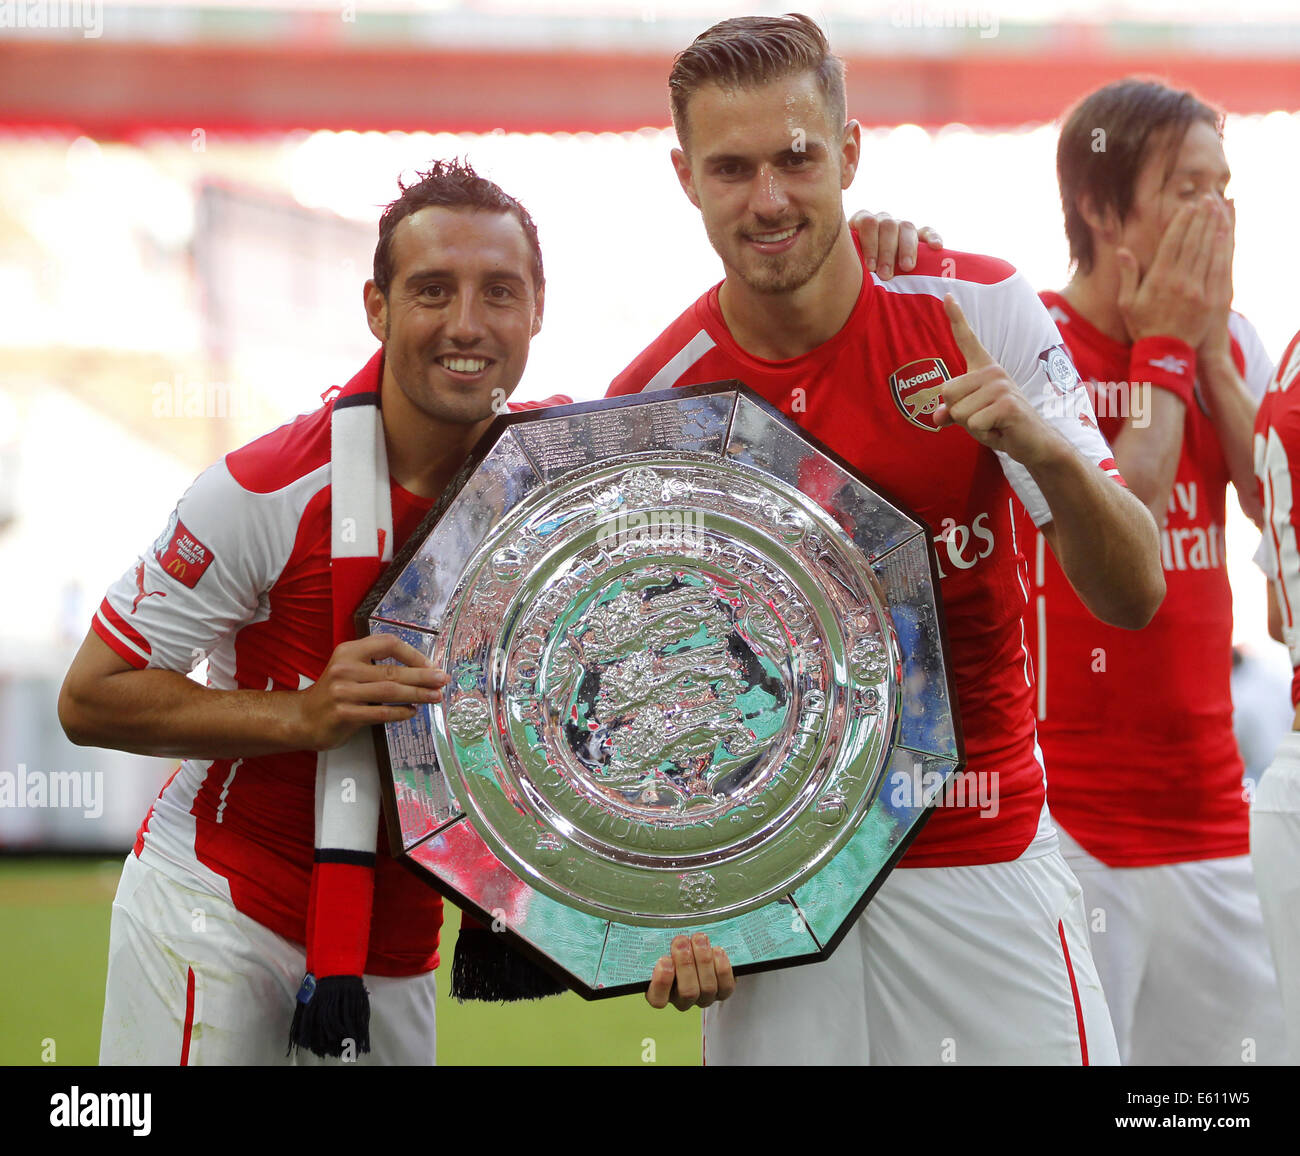 London, UK. 10th Aug, 2014. Santi Cazorla(L) and Aaron Ramsey of Arsenal pose with the community shield after the Community Shield match between Arsenal and Manchester City at Wembley Stadium in London, Britain on Aug. 10, 2014. Arsenal won 3-0. Credit:  Wang Lili/Xinhua/Alamy Live News Stock Photo